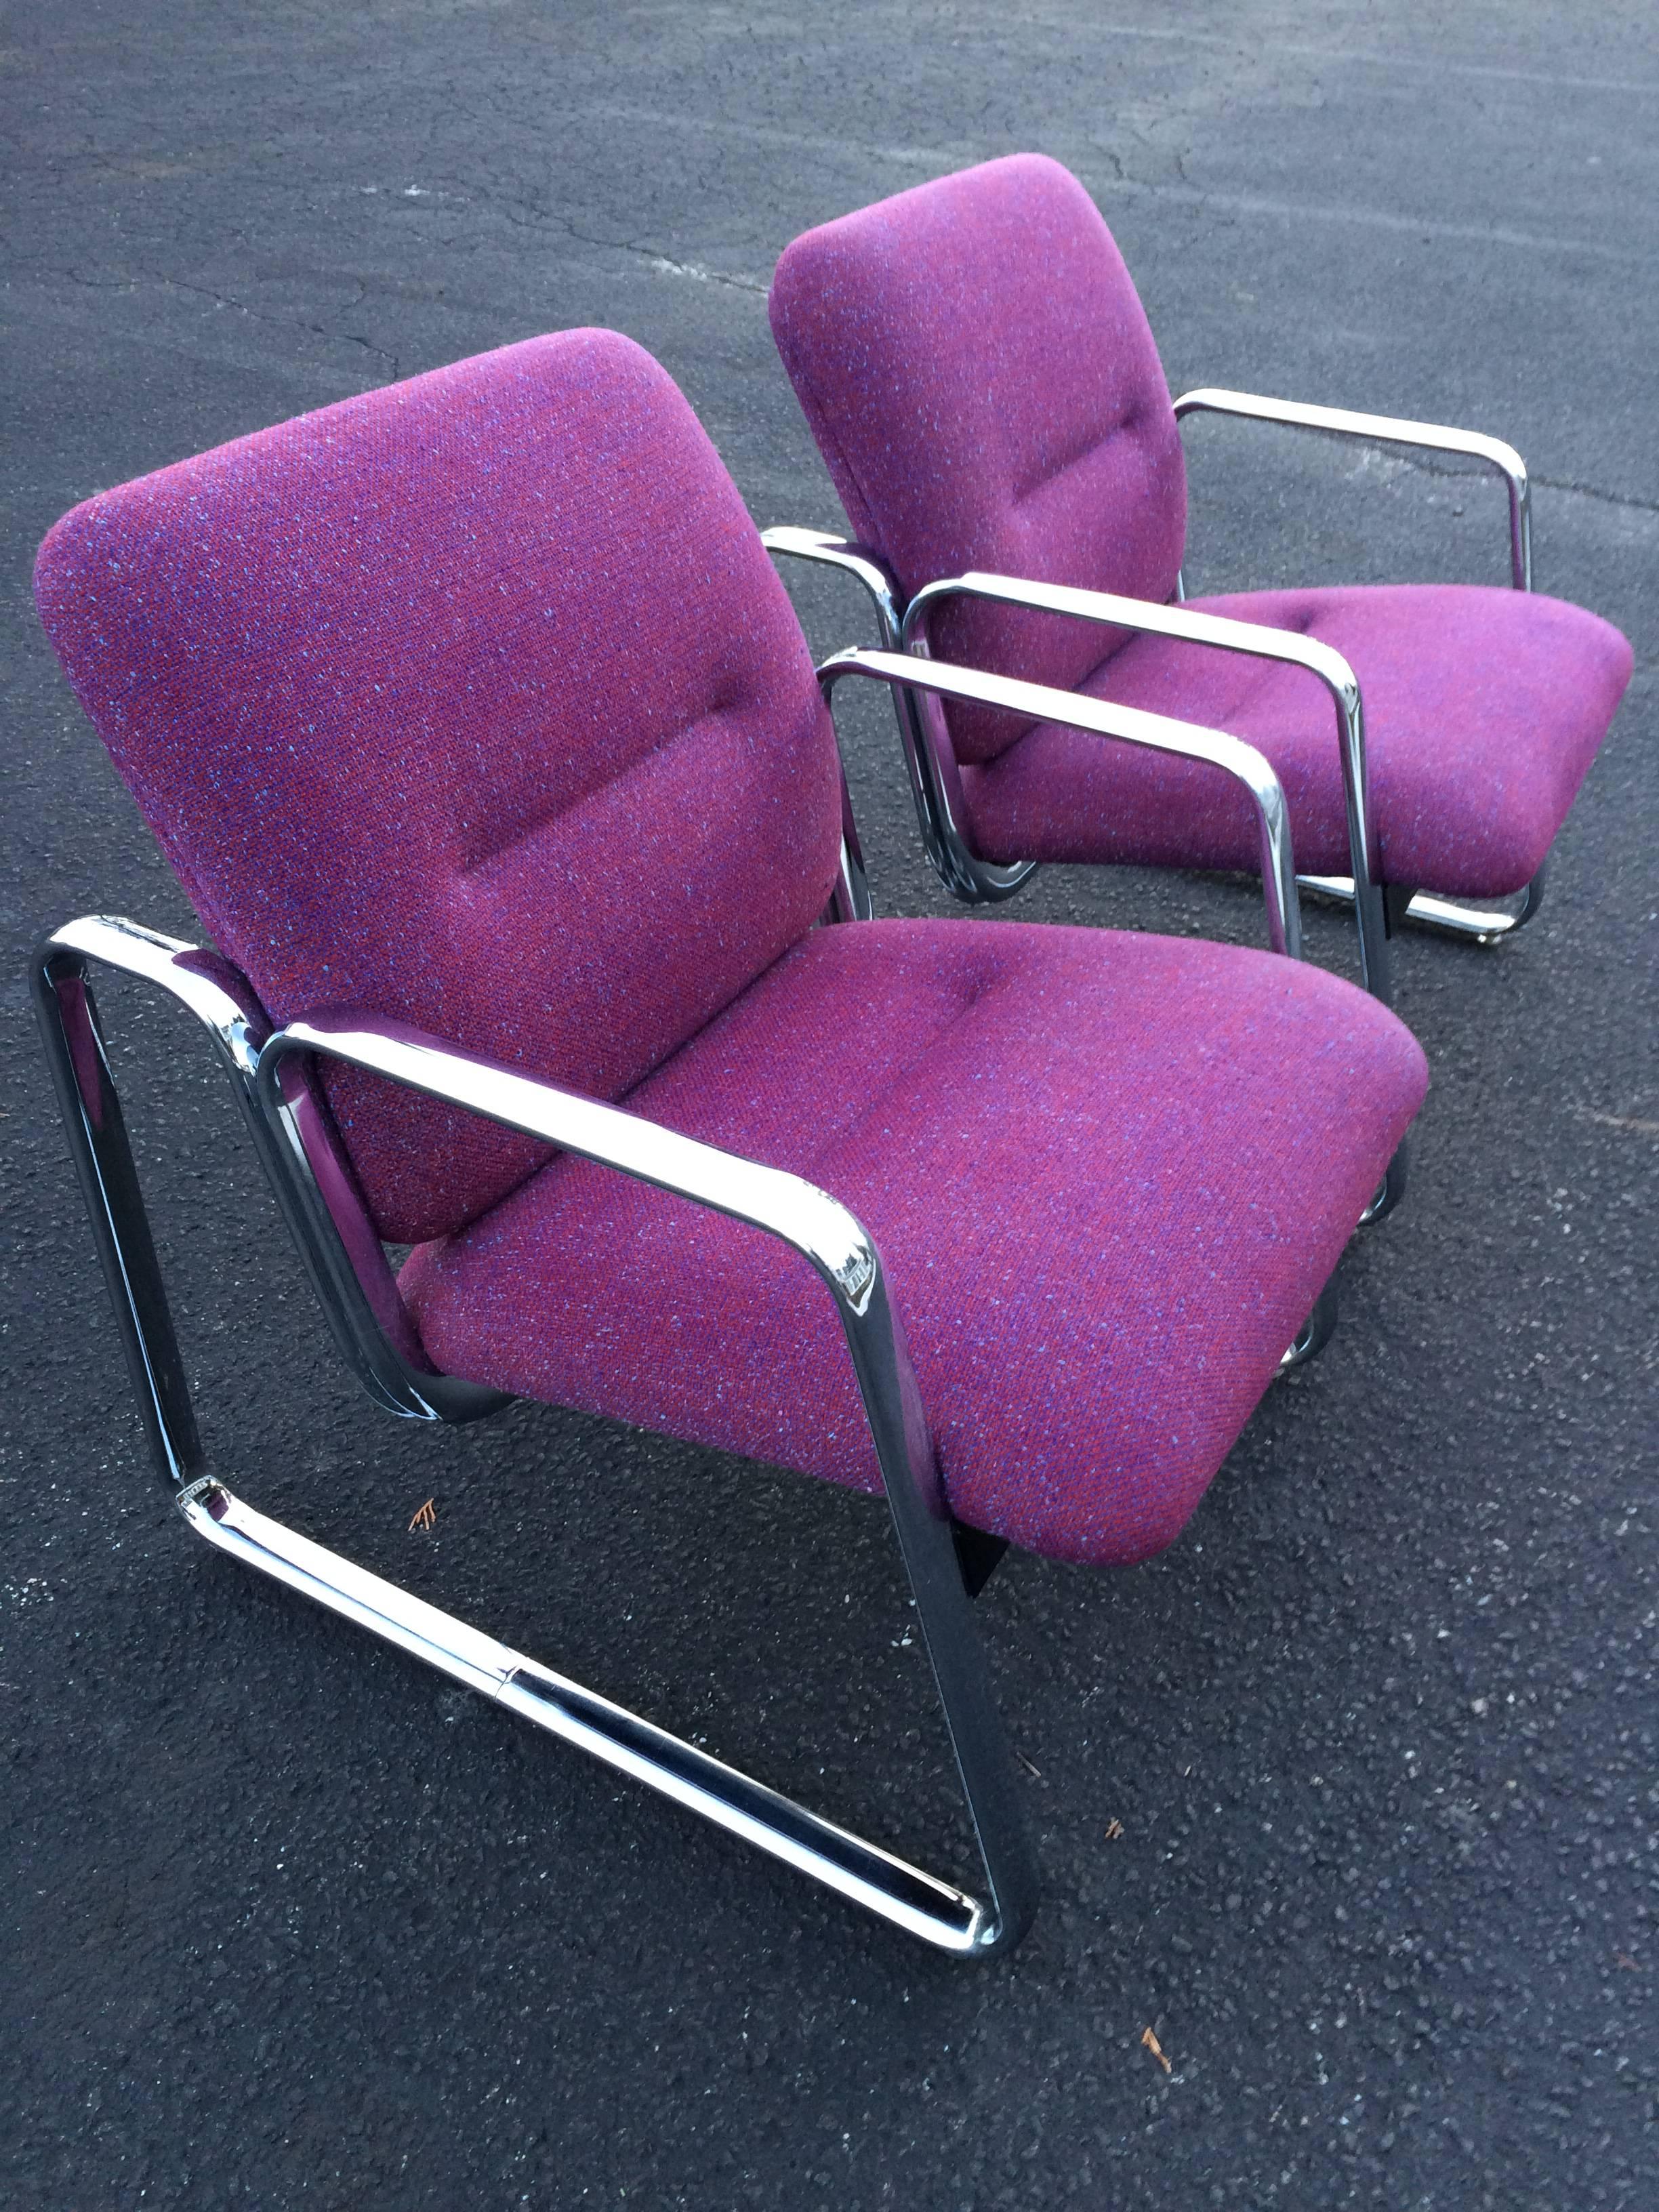 Pair of chrome steelcase chairs in violet. The remarkable color and condition of these chairs is amazing. So strong and sturdy! These chairs are kid friendly as well. Perfect to brighten up any room, office or home. Steelcase label underneath chair.